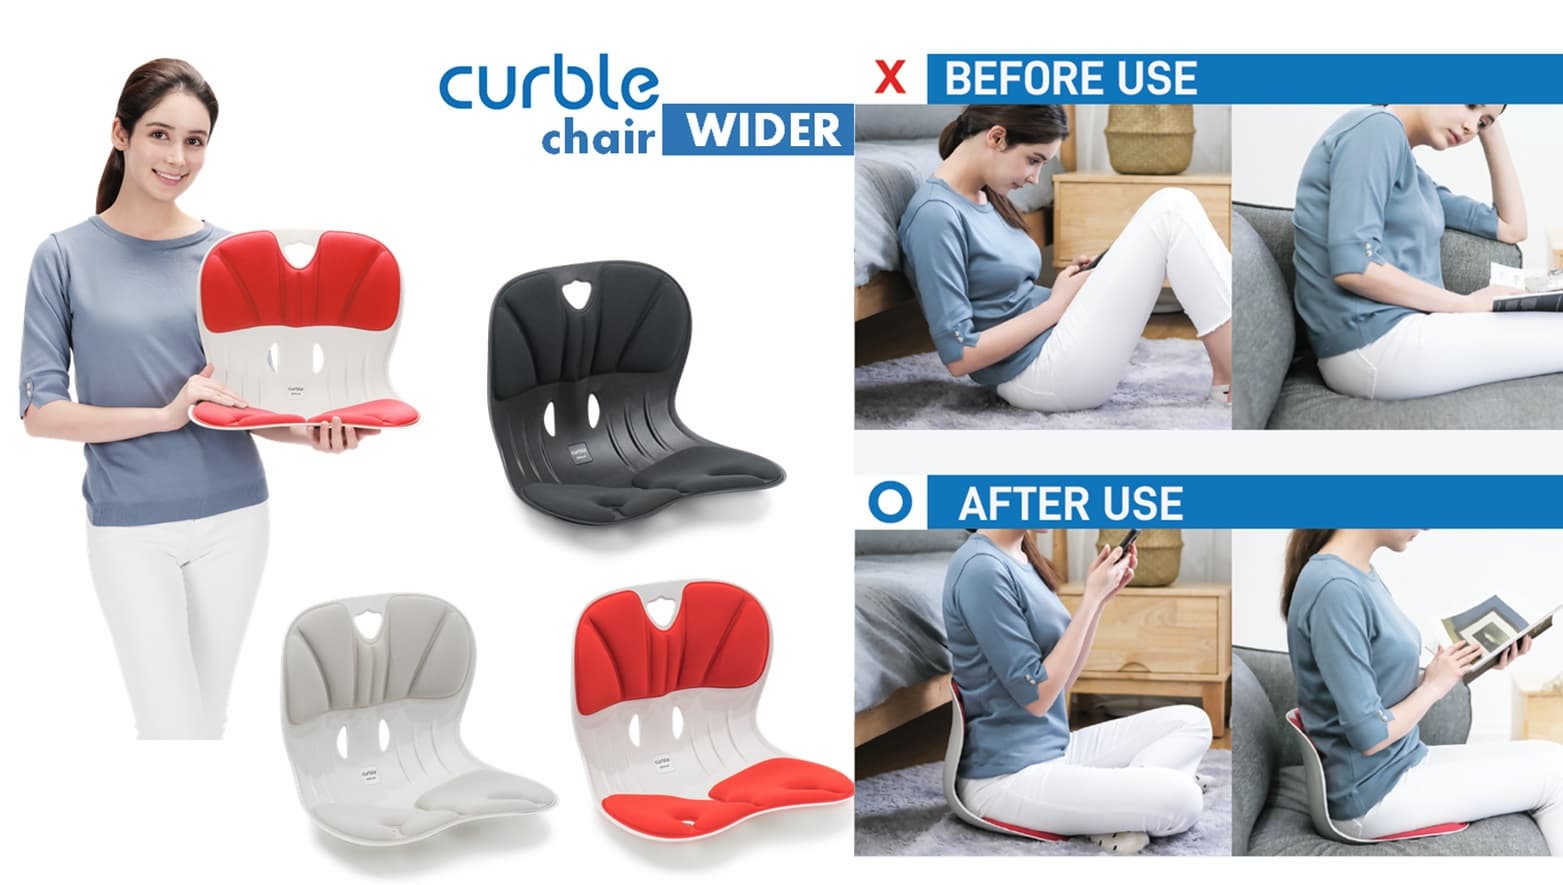 CURBLE WIDER